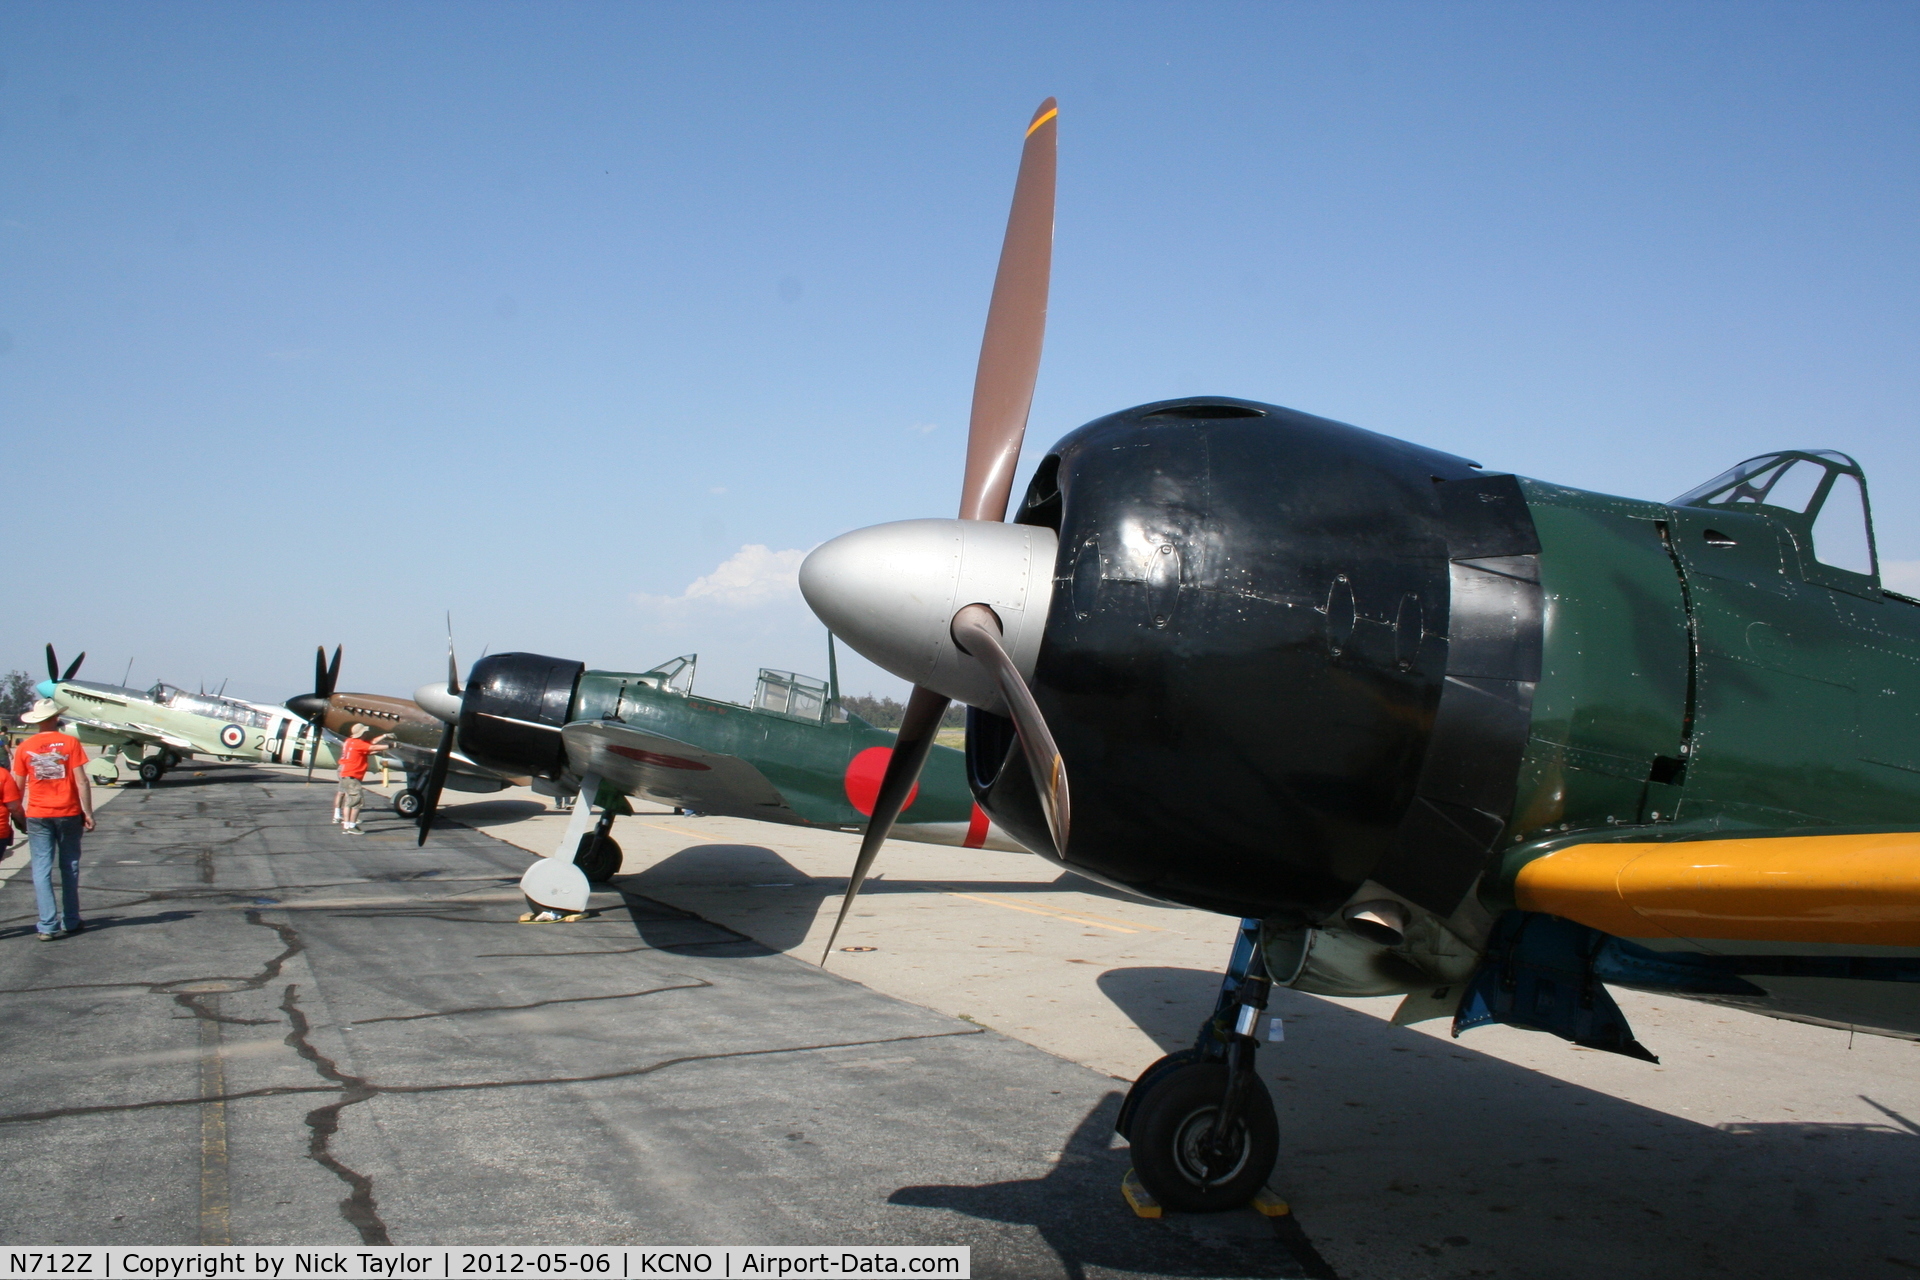 N712Z, 1942 Mitsubishi A6M3 Reisen (Zero) C/N 3869, Parked with N553TT and N749DP and N514WB at the Chino Air Show